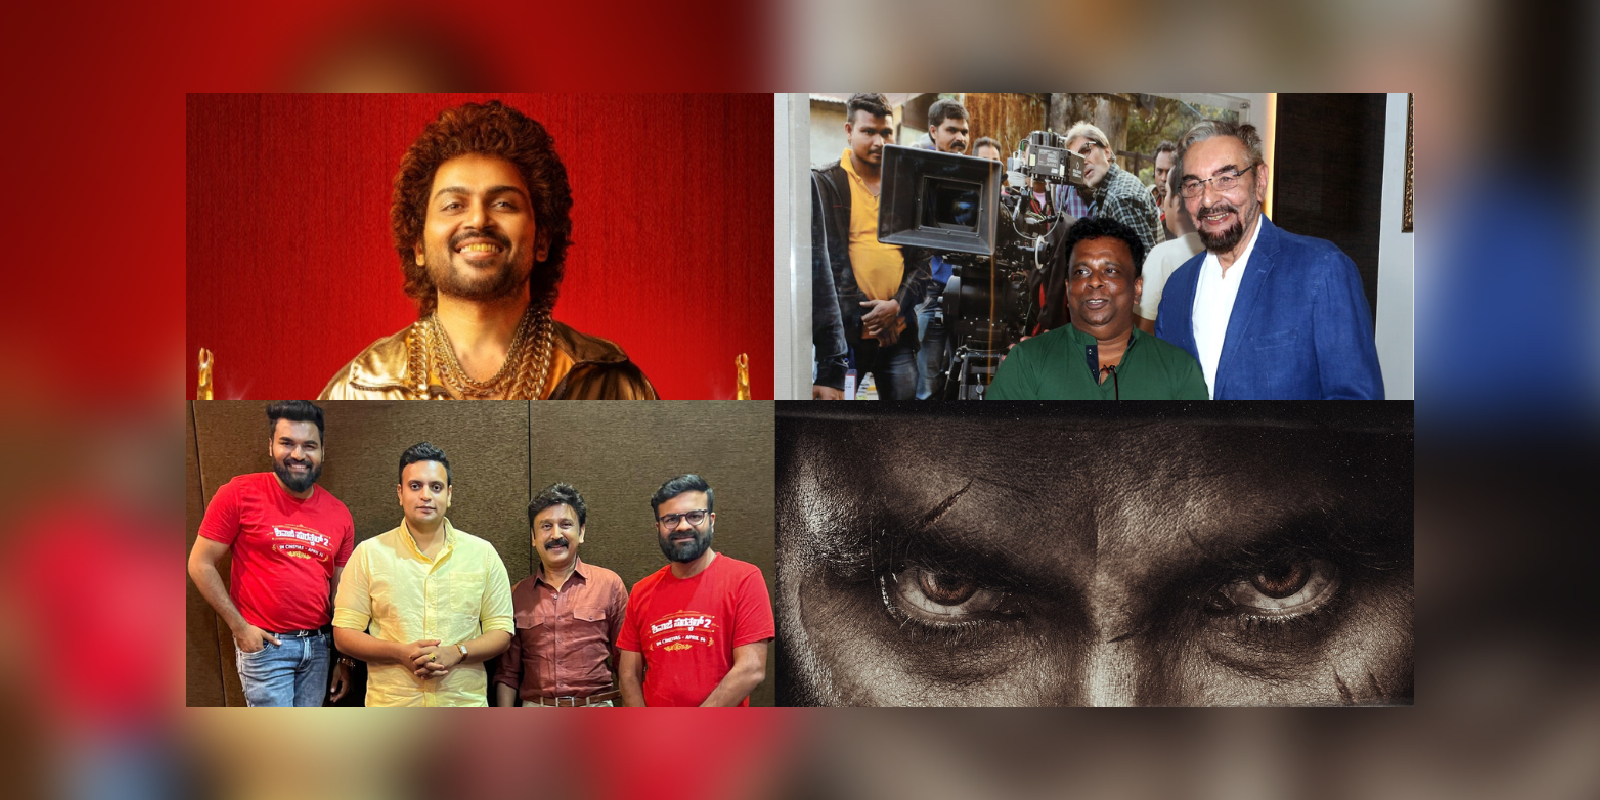 The latest film updates from South India. (Supplied)